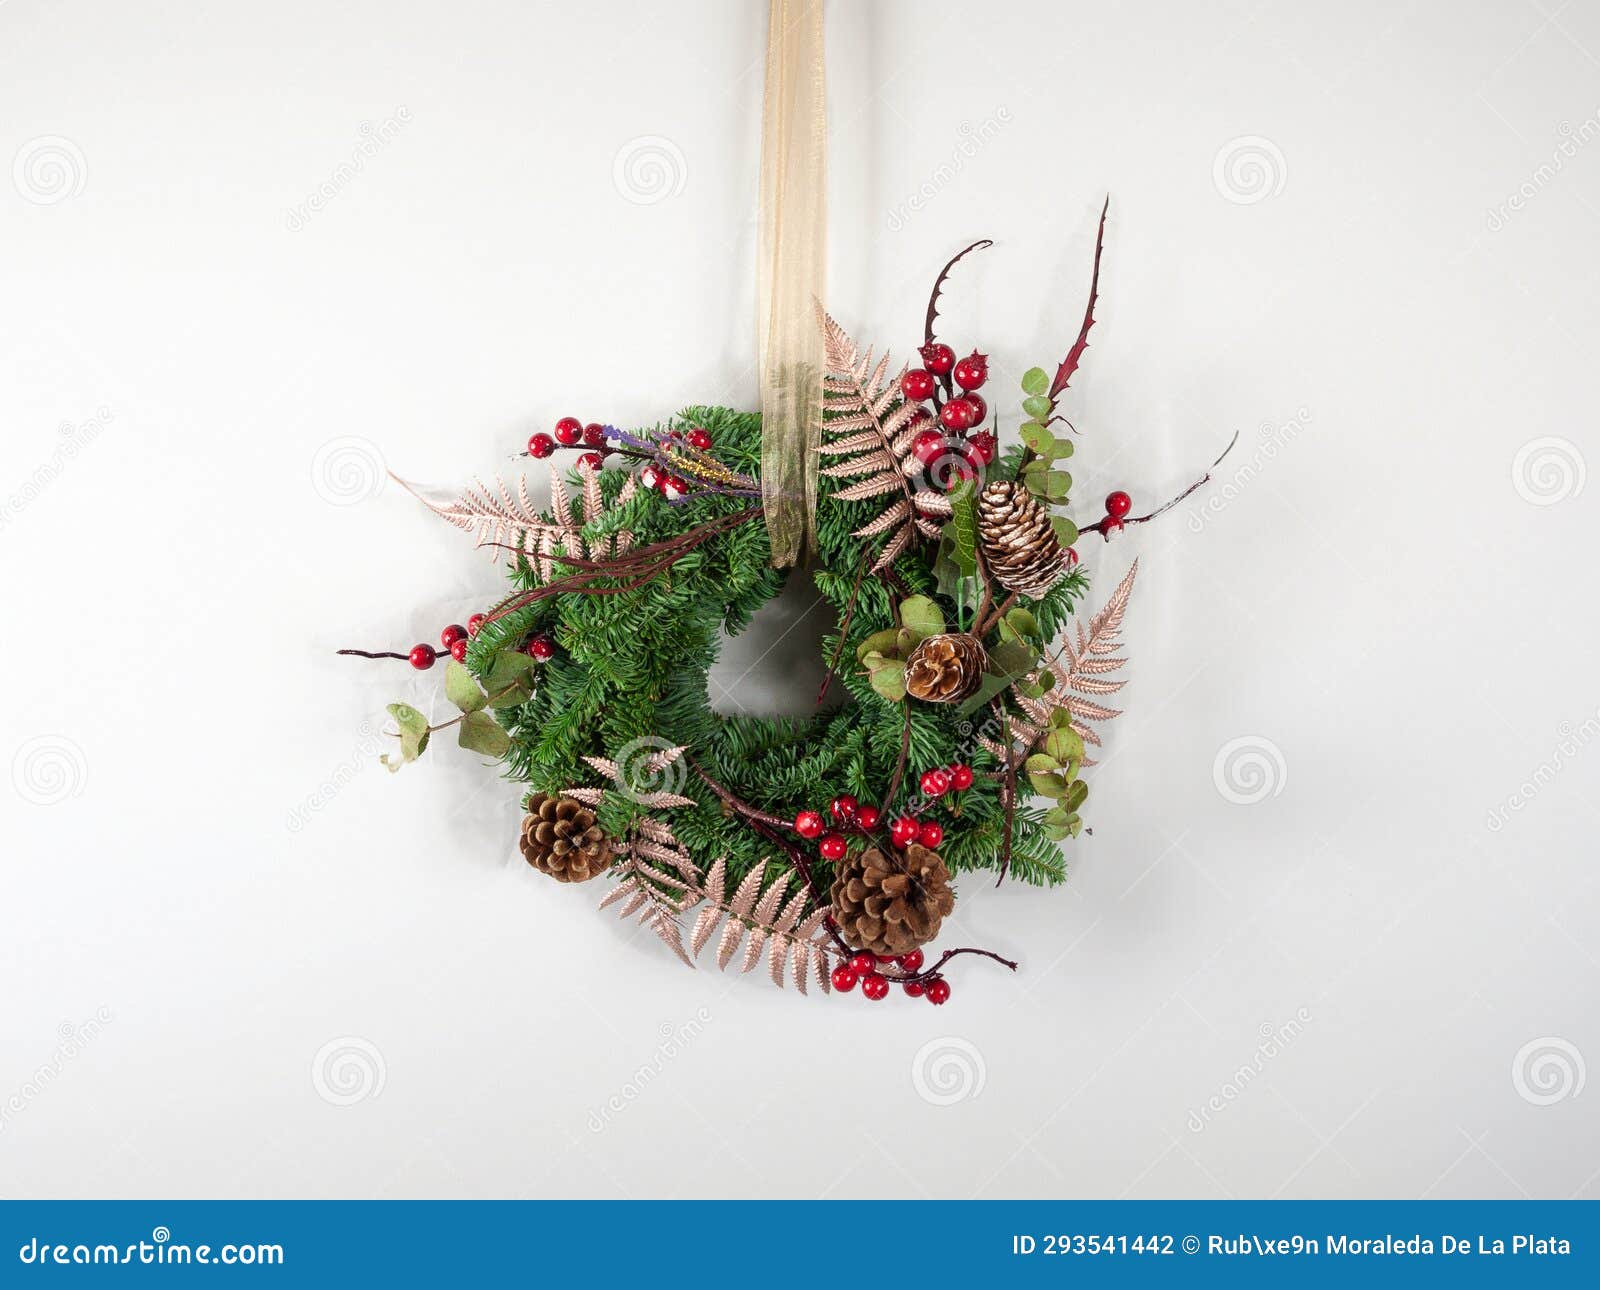 small christmas flower wreath on white background.